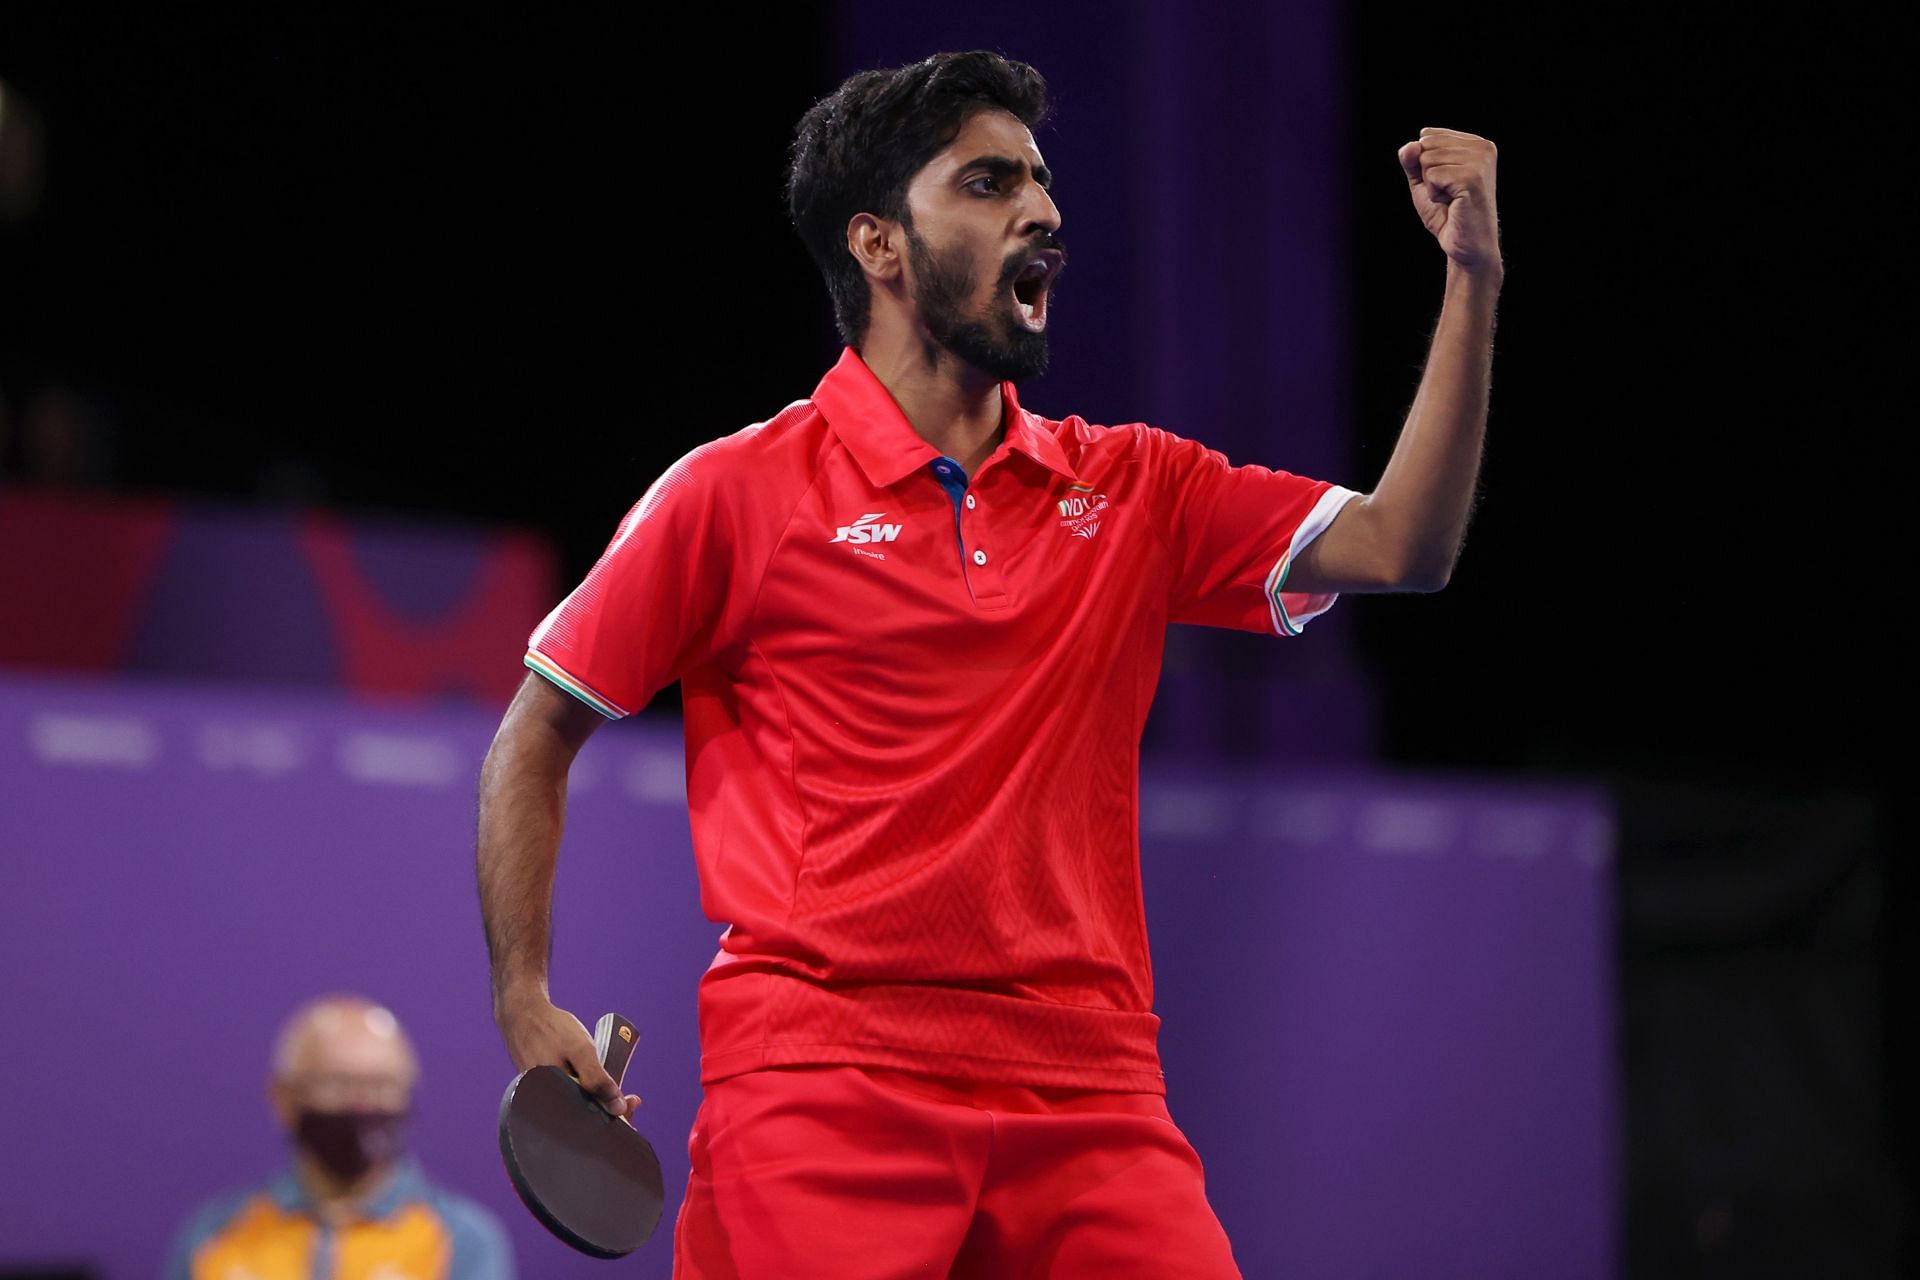 India&#039;s Sathiyan Gnanasekaran after winning the bronze medal. (PC: Getty Images)